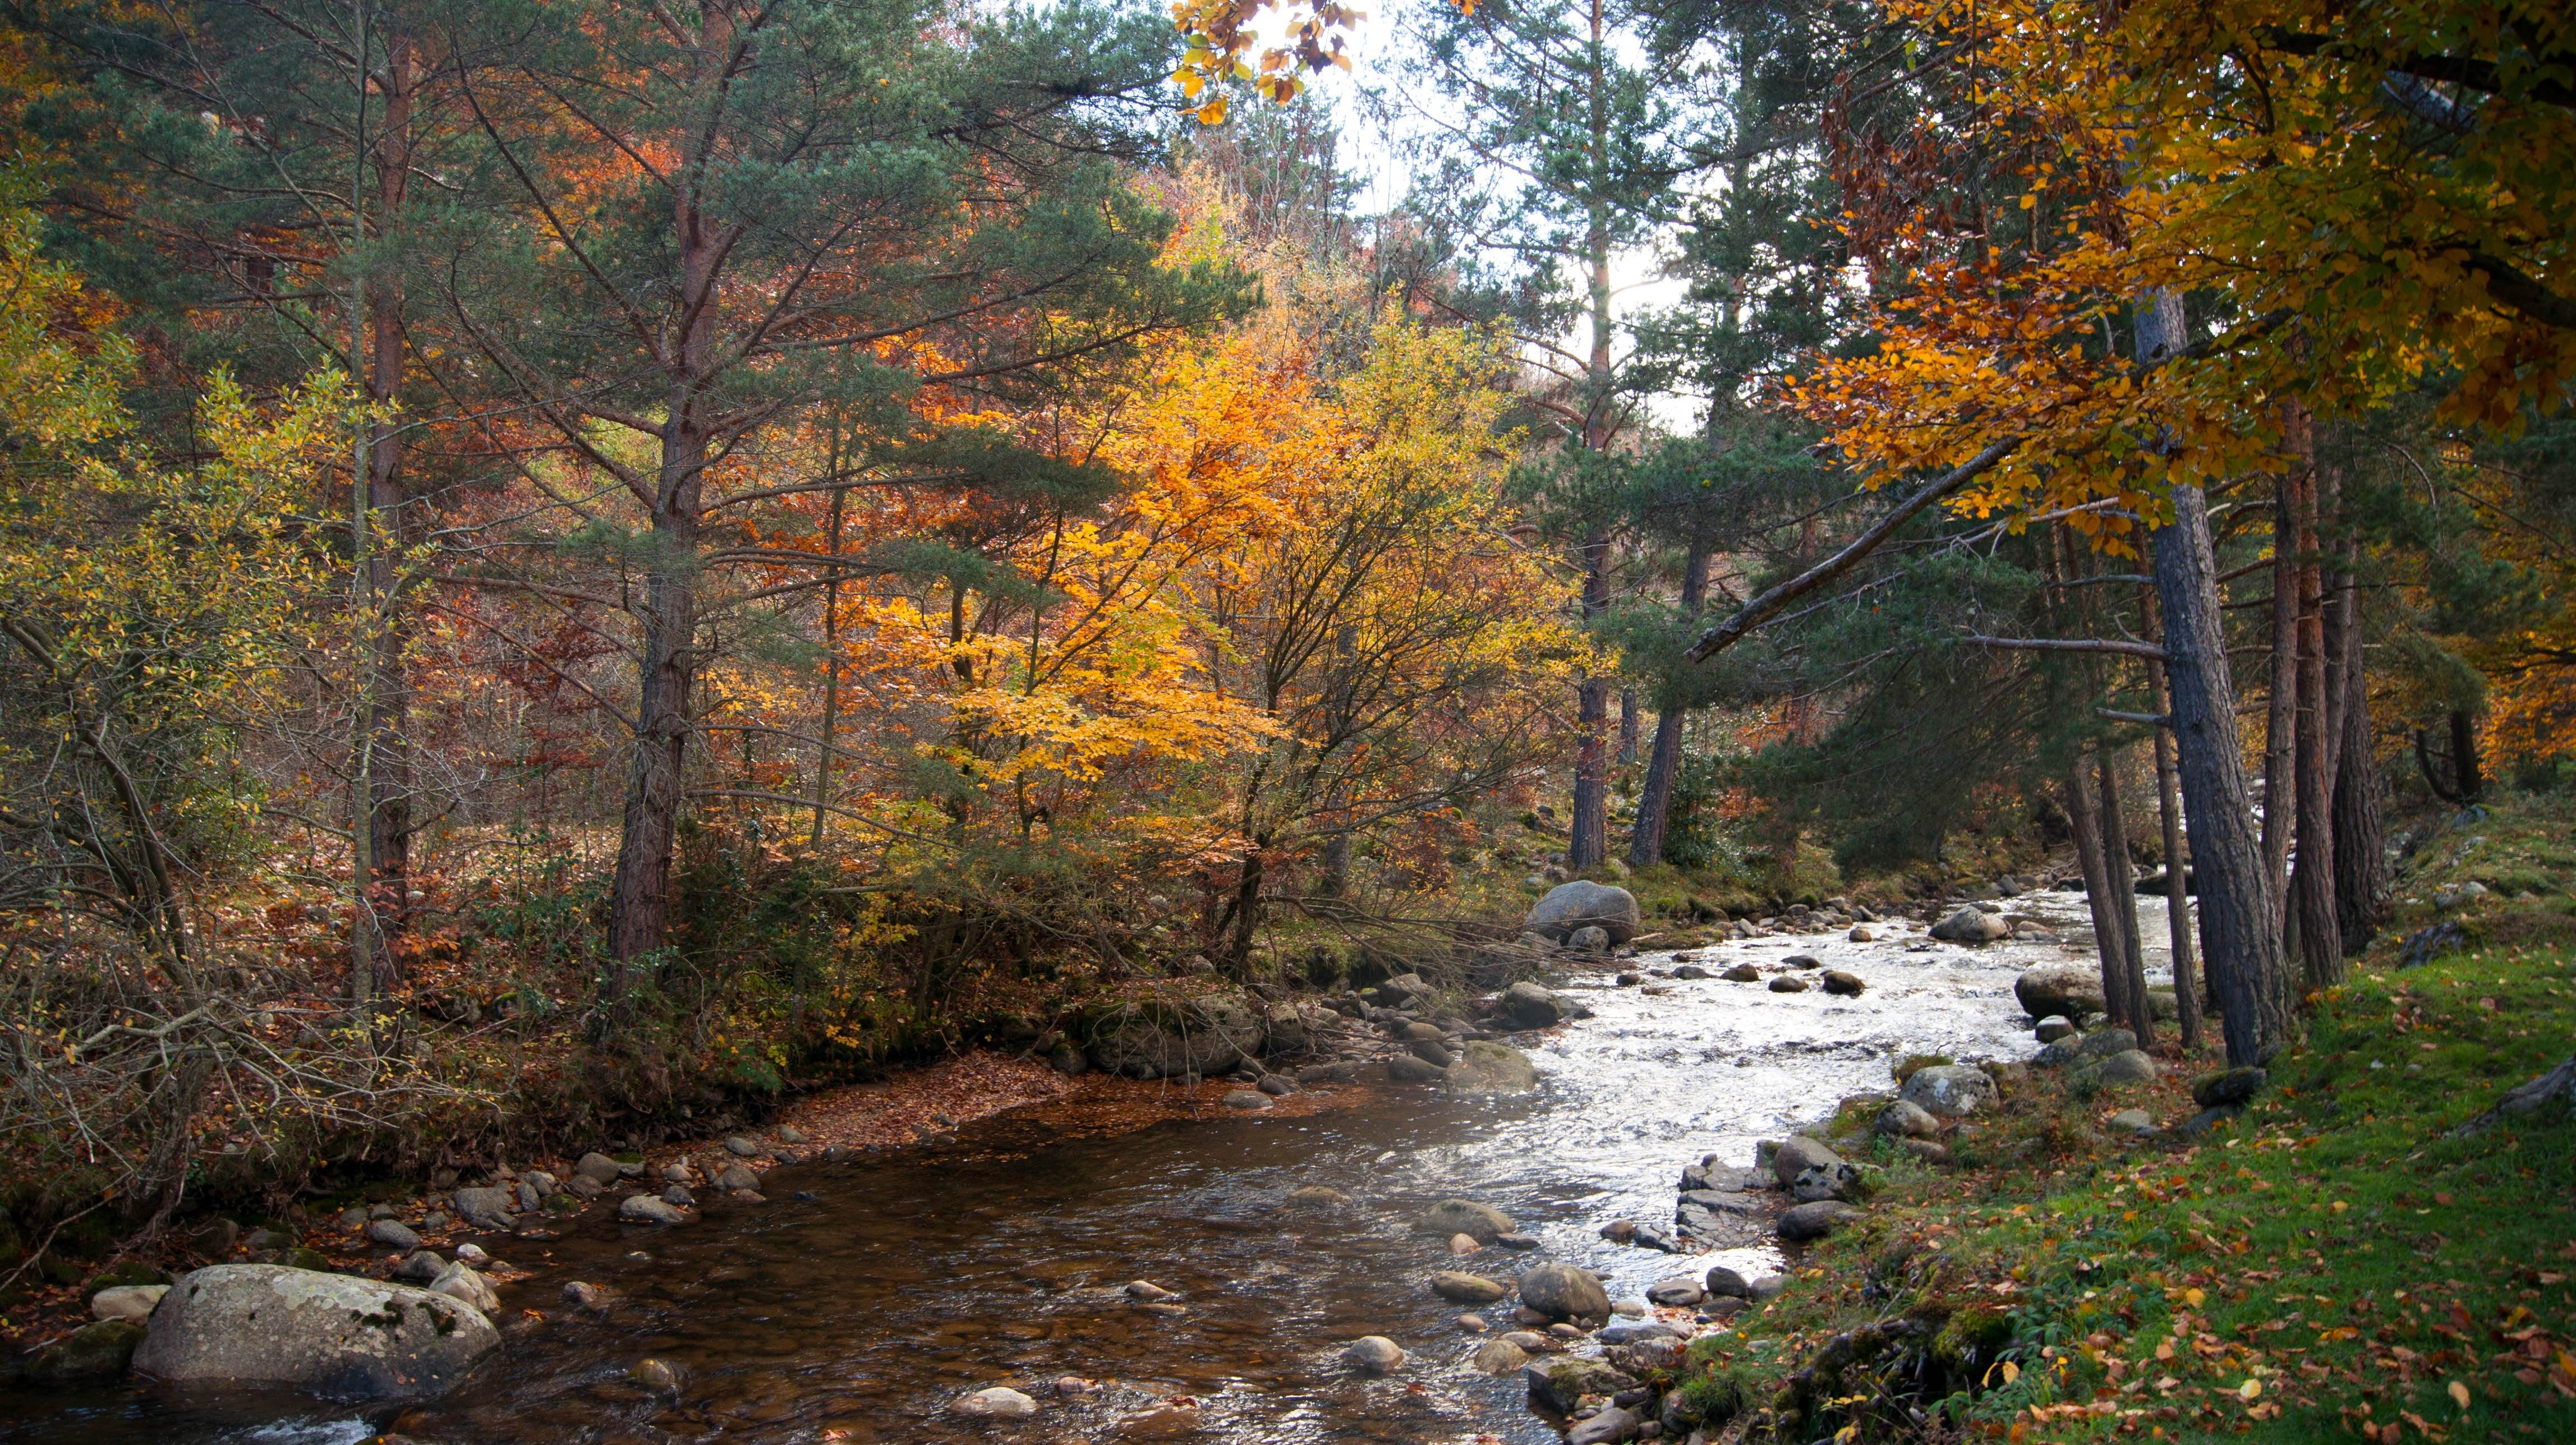 A small creek surrounded by trees in the fall.